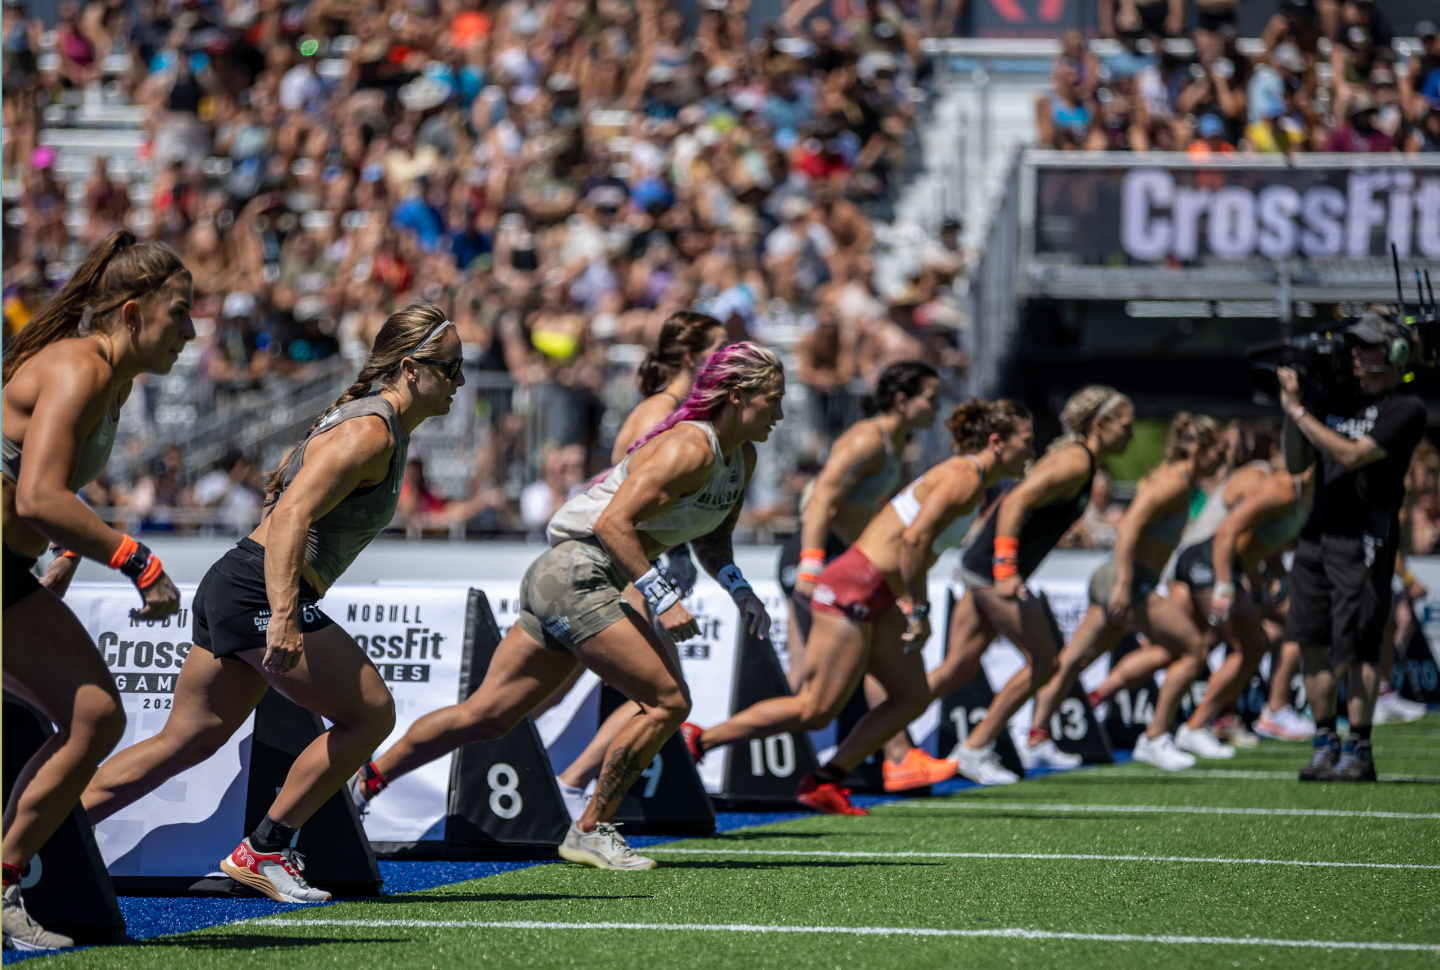 WOLFpak Are the New Sponsors of The West Coast Classic CrossFit Games